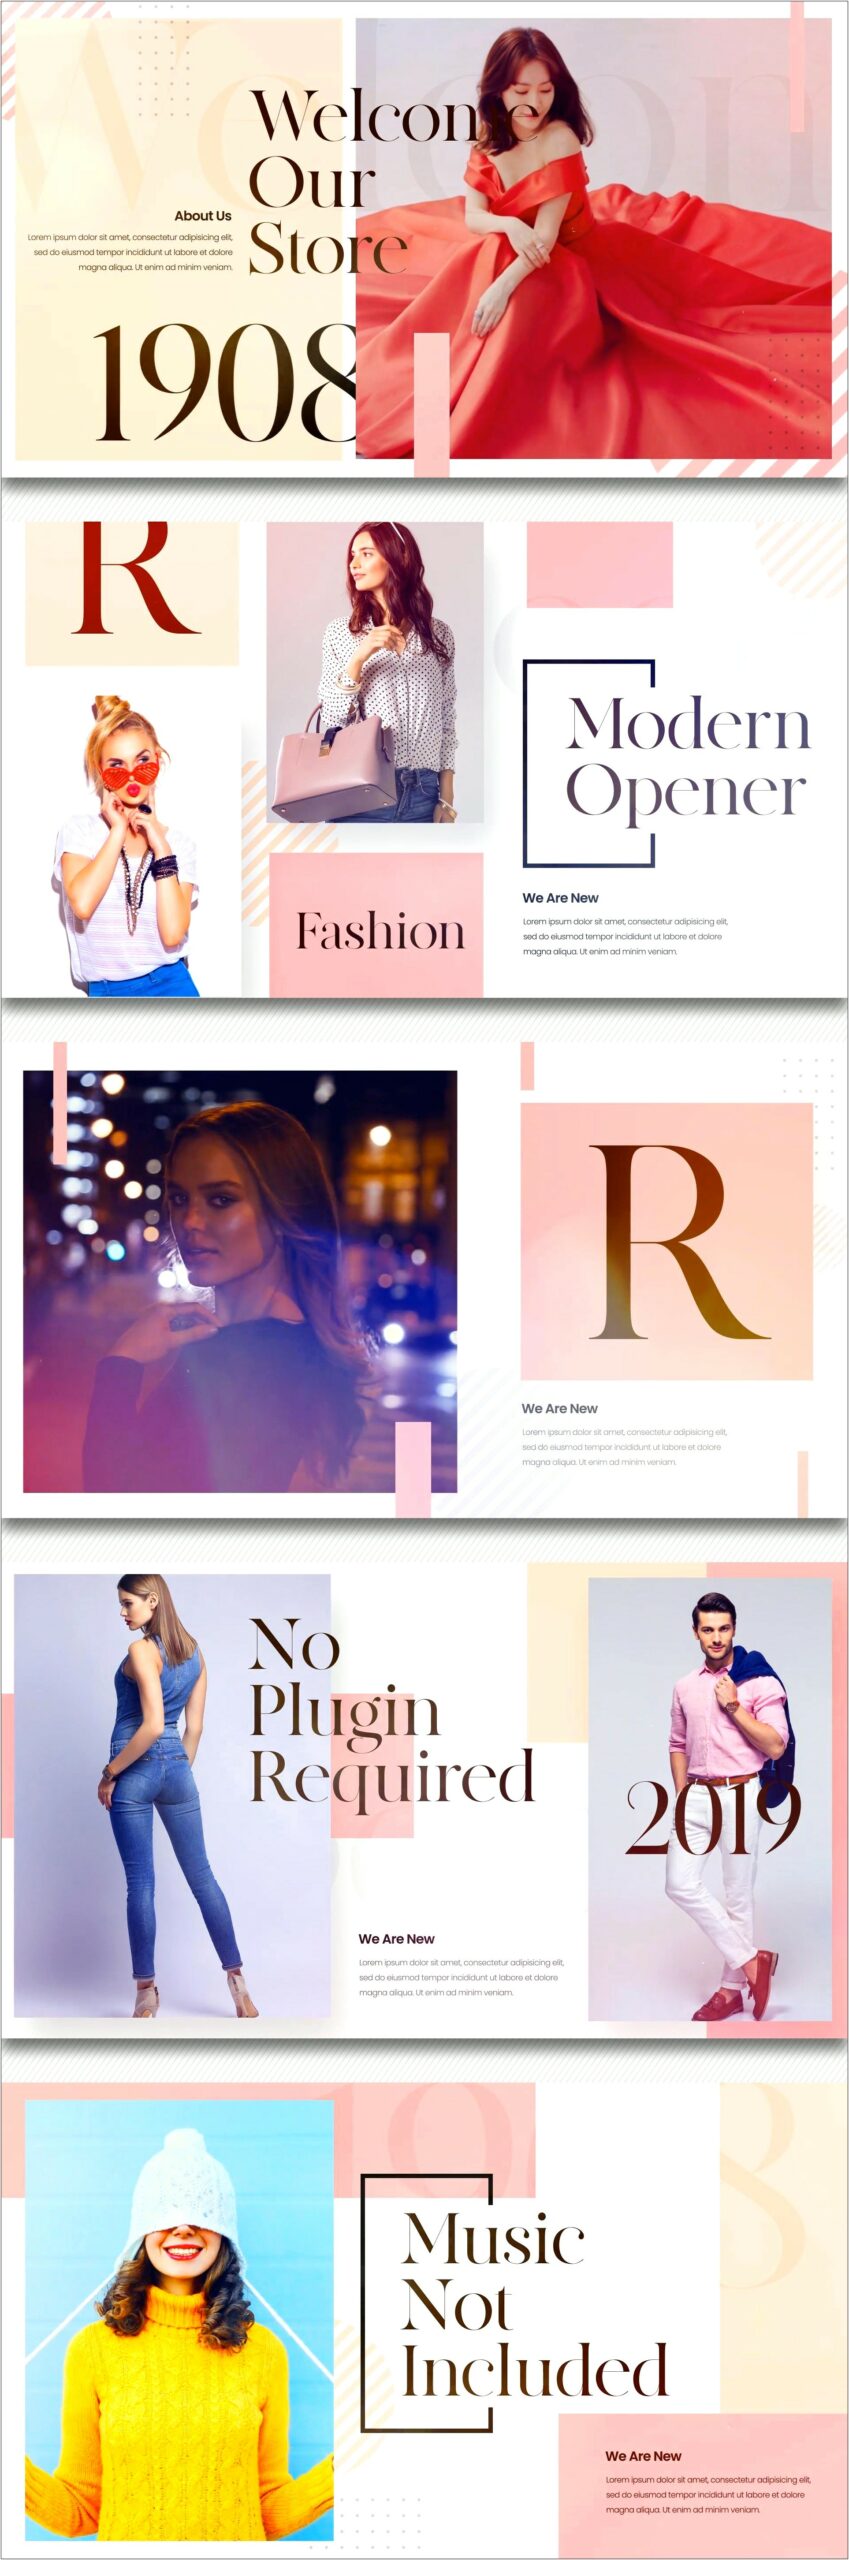 Fashion Store After Effects Template Free Download